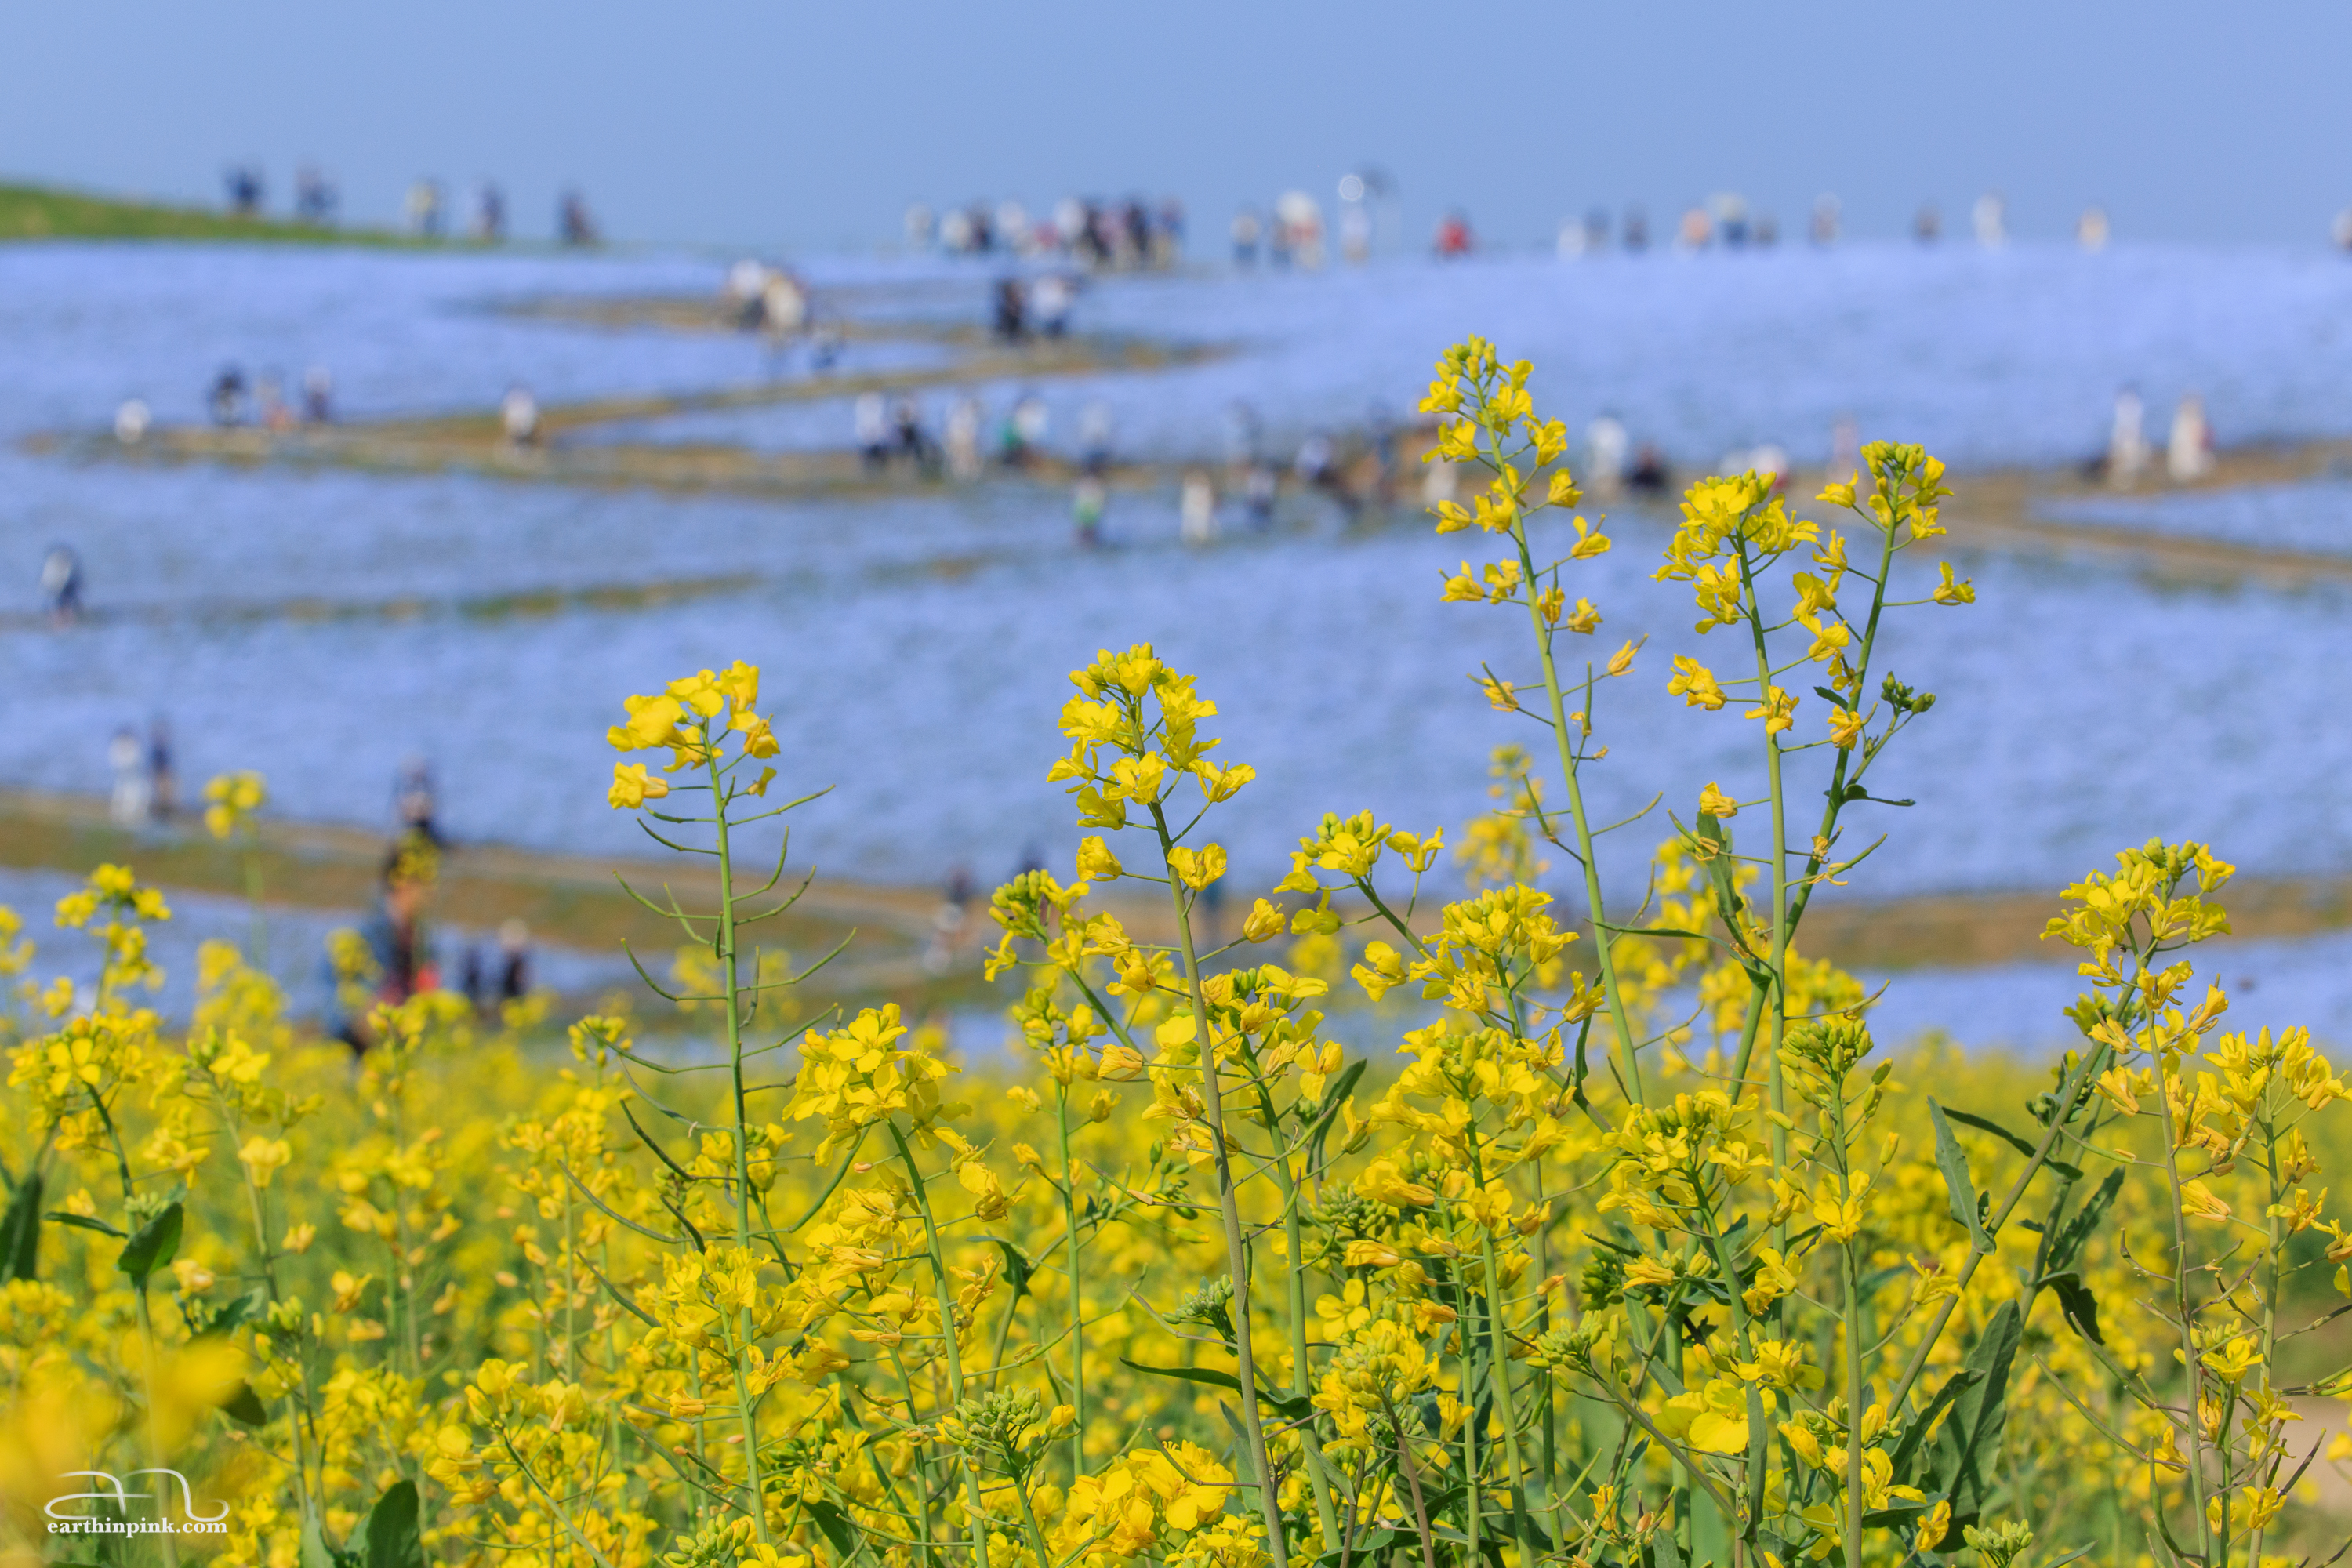 Yellow rapeseed flowers against the blue hill covered in nemophila blossoms at Hitachi Seaside park, Ibaraki Prefecture.